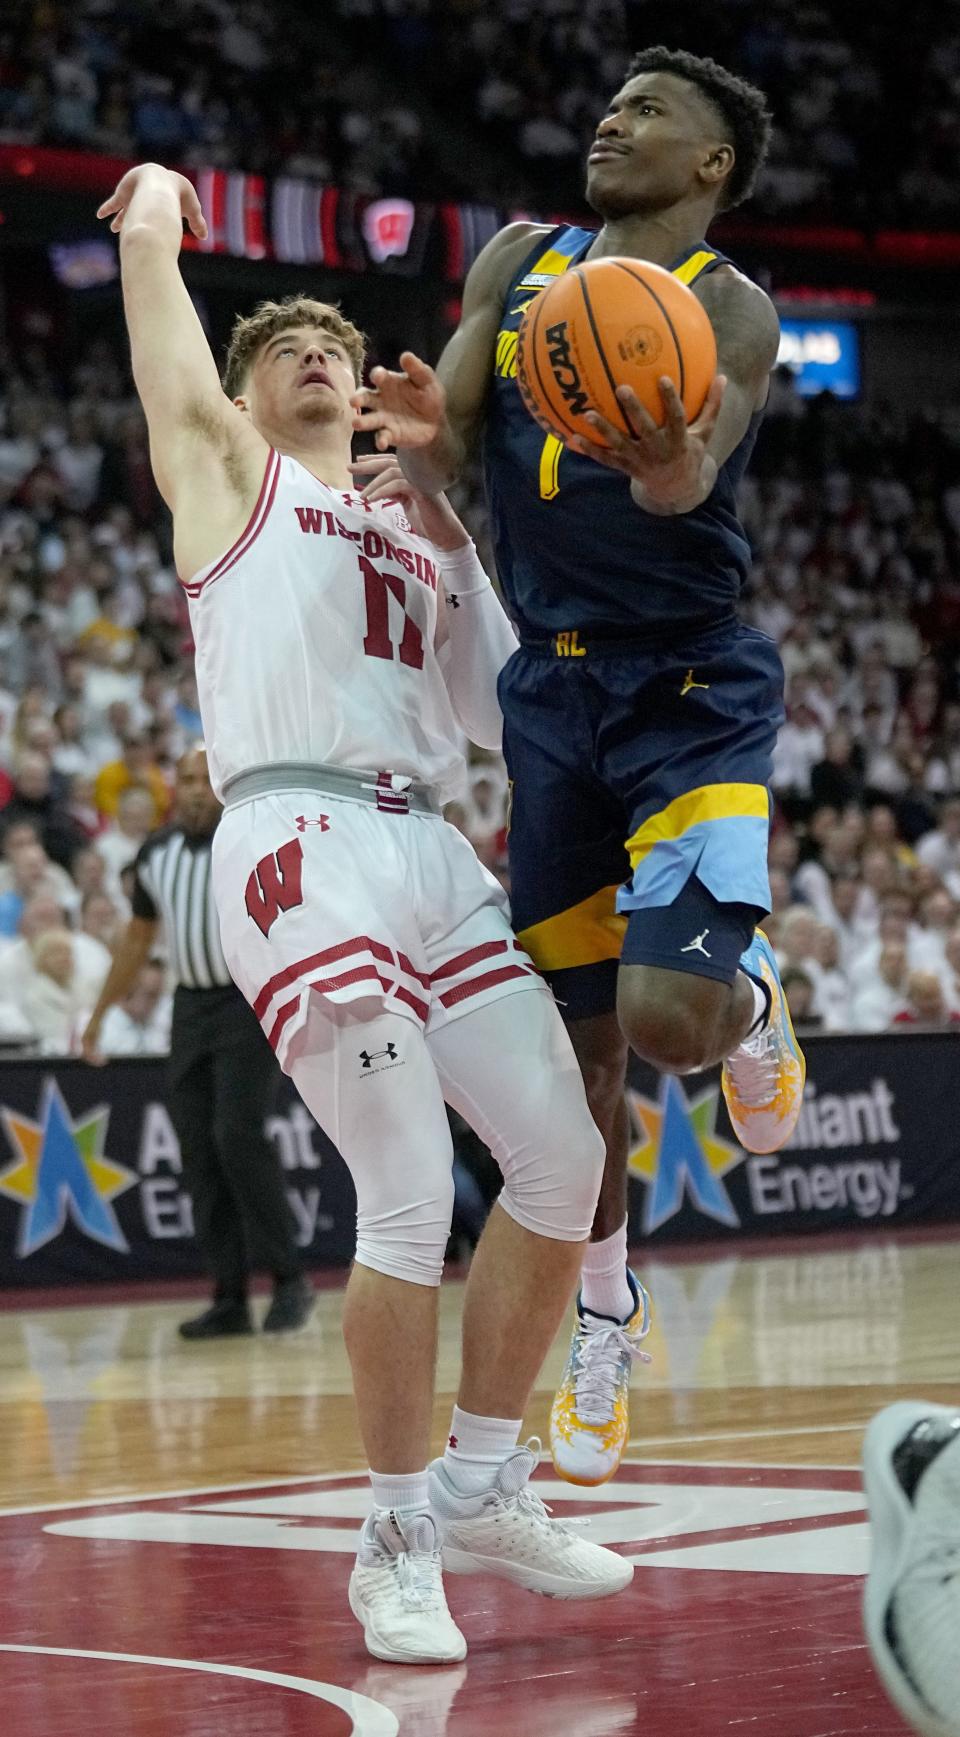 Kam Jones was Marquette's best offensive player against UW, scoring 19 points on 7-for-12 shooting.